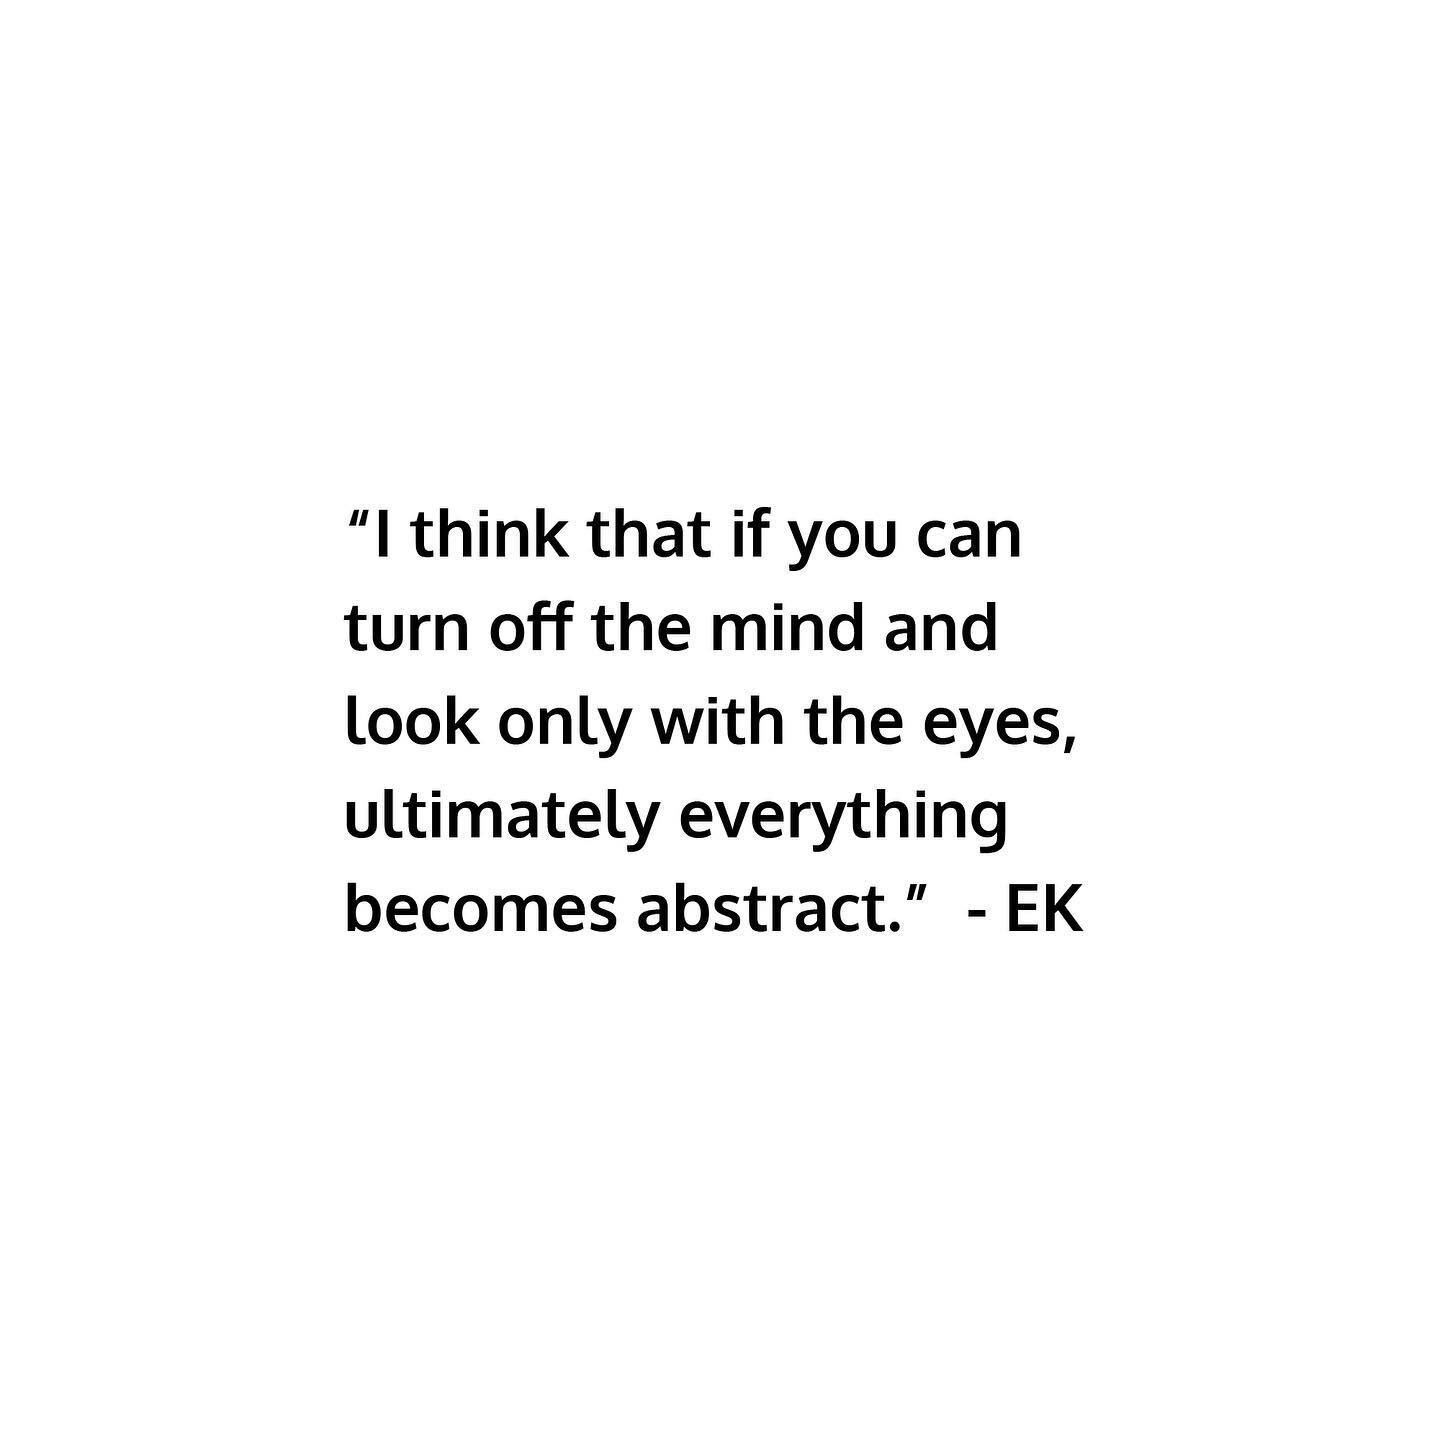 &ldquo;I think that if you can turn off the mind and look only with the eyes, ultimately everything becomes abstract.&rdquo; - EK

讓我們暫時拋去花藝的束縛，用最直觀的方式，為生活注入詩意，以抽象的視角詮釋生活 - KIMU

#Stayhome
#Stayhappy
#StaywithKIMU
&mdash;&mdash;&mdash;&mdash;&mdash;&